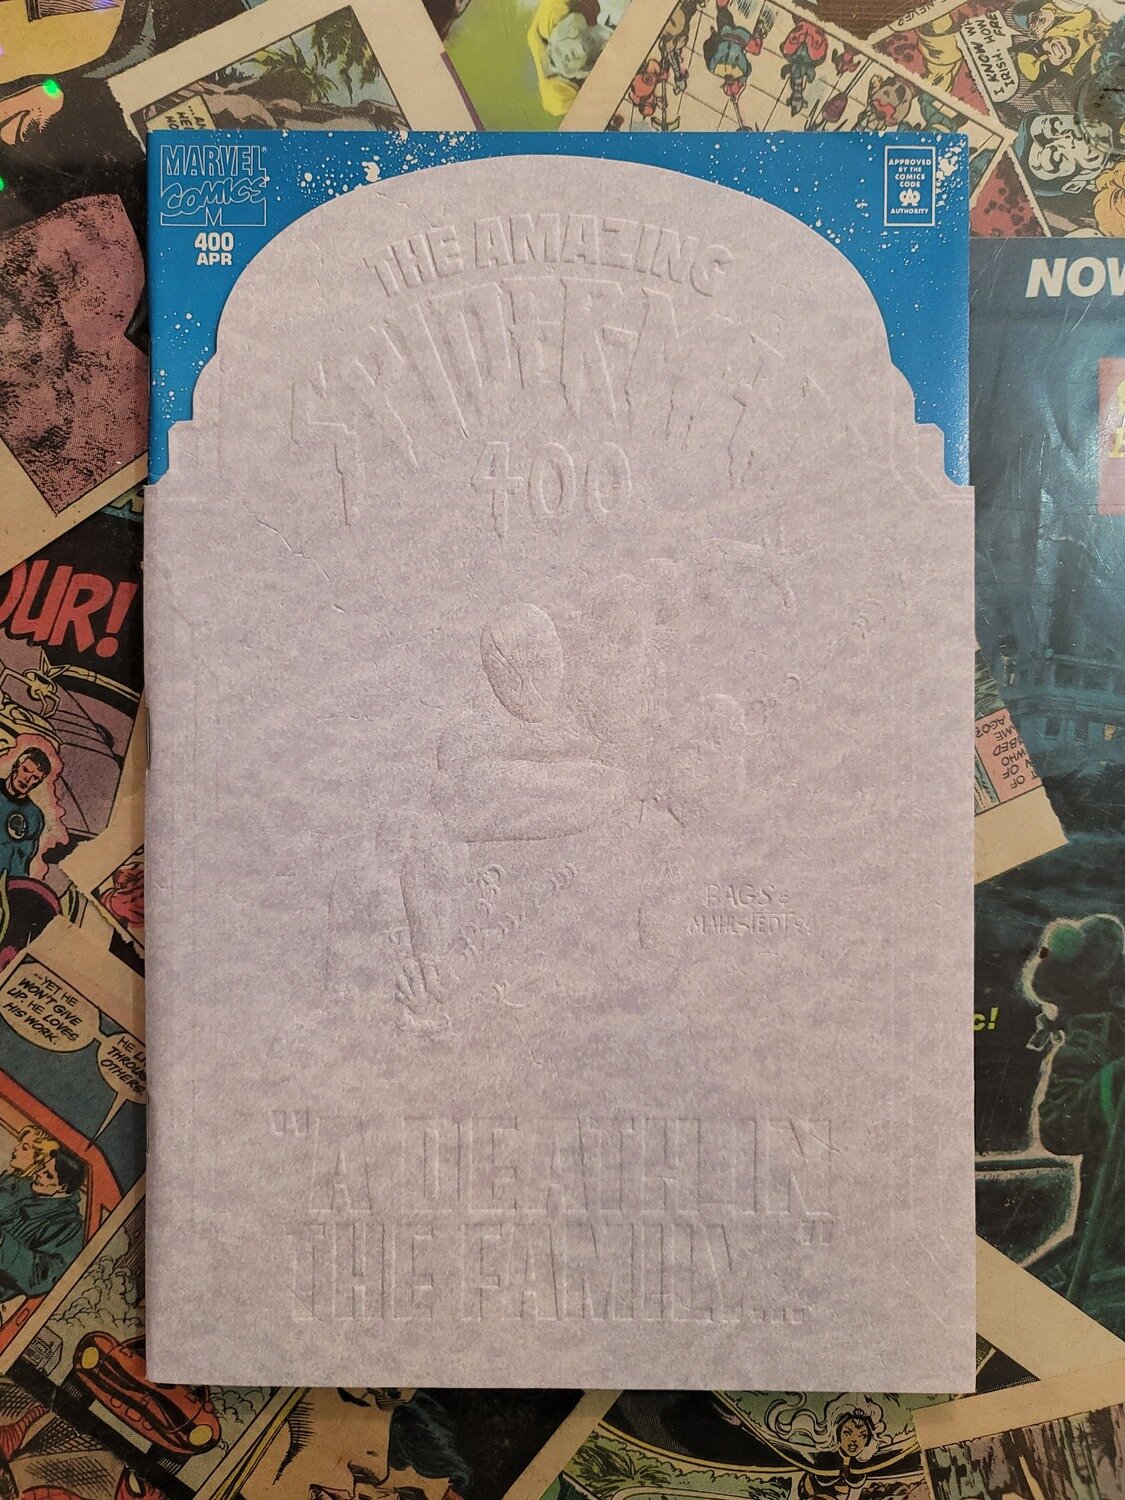 Amazing Spider-man #400 9.2 Death of Aunt May embossed cover